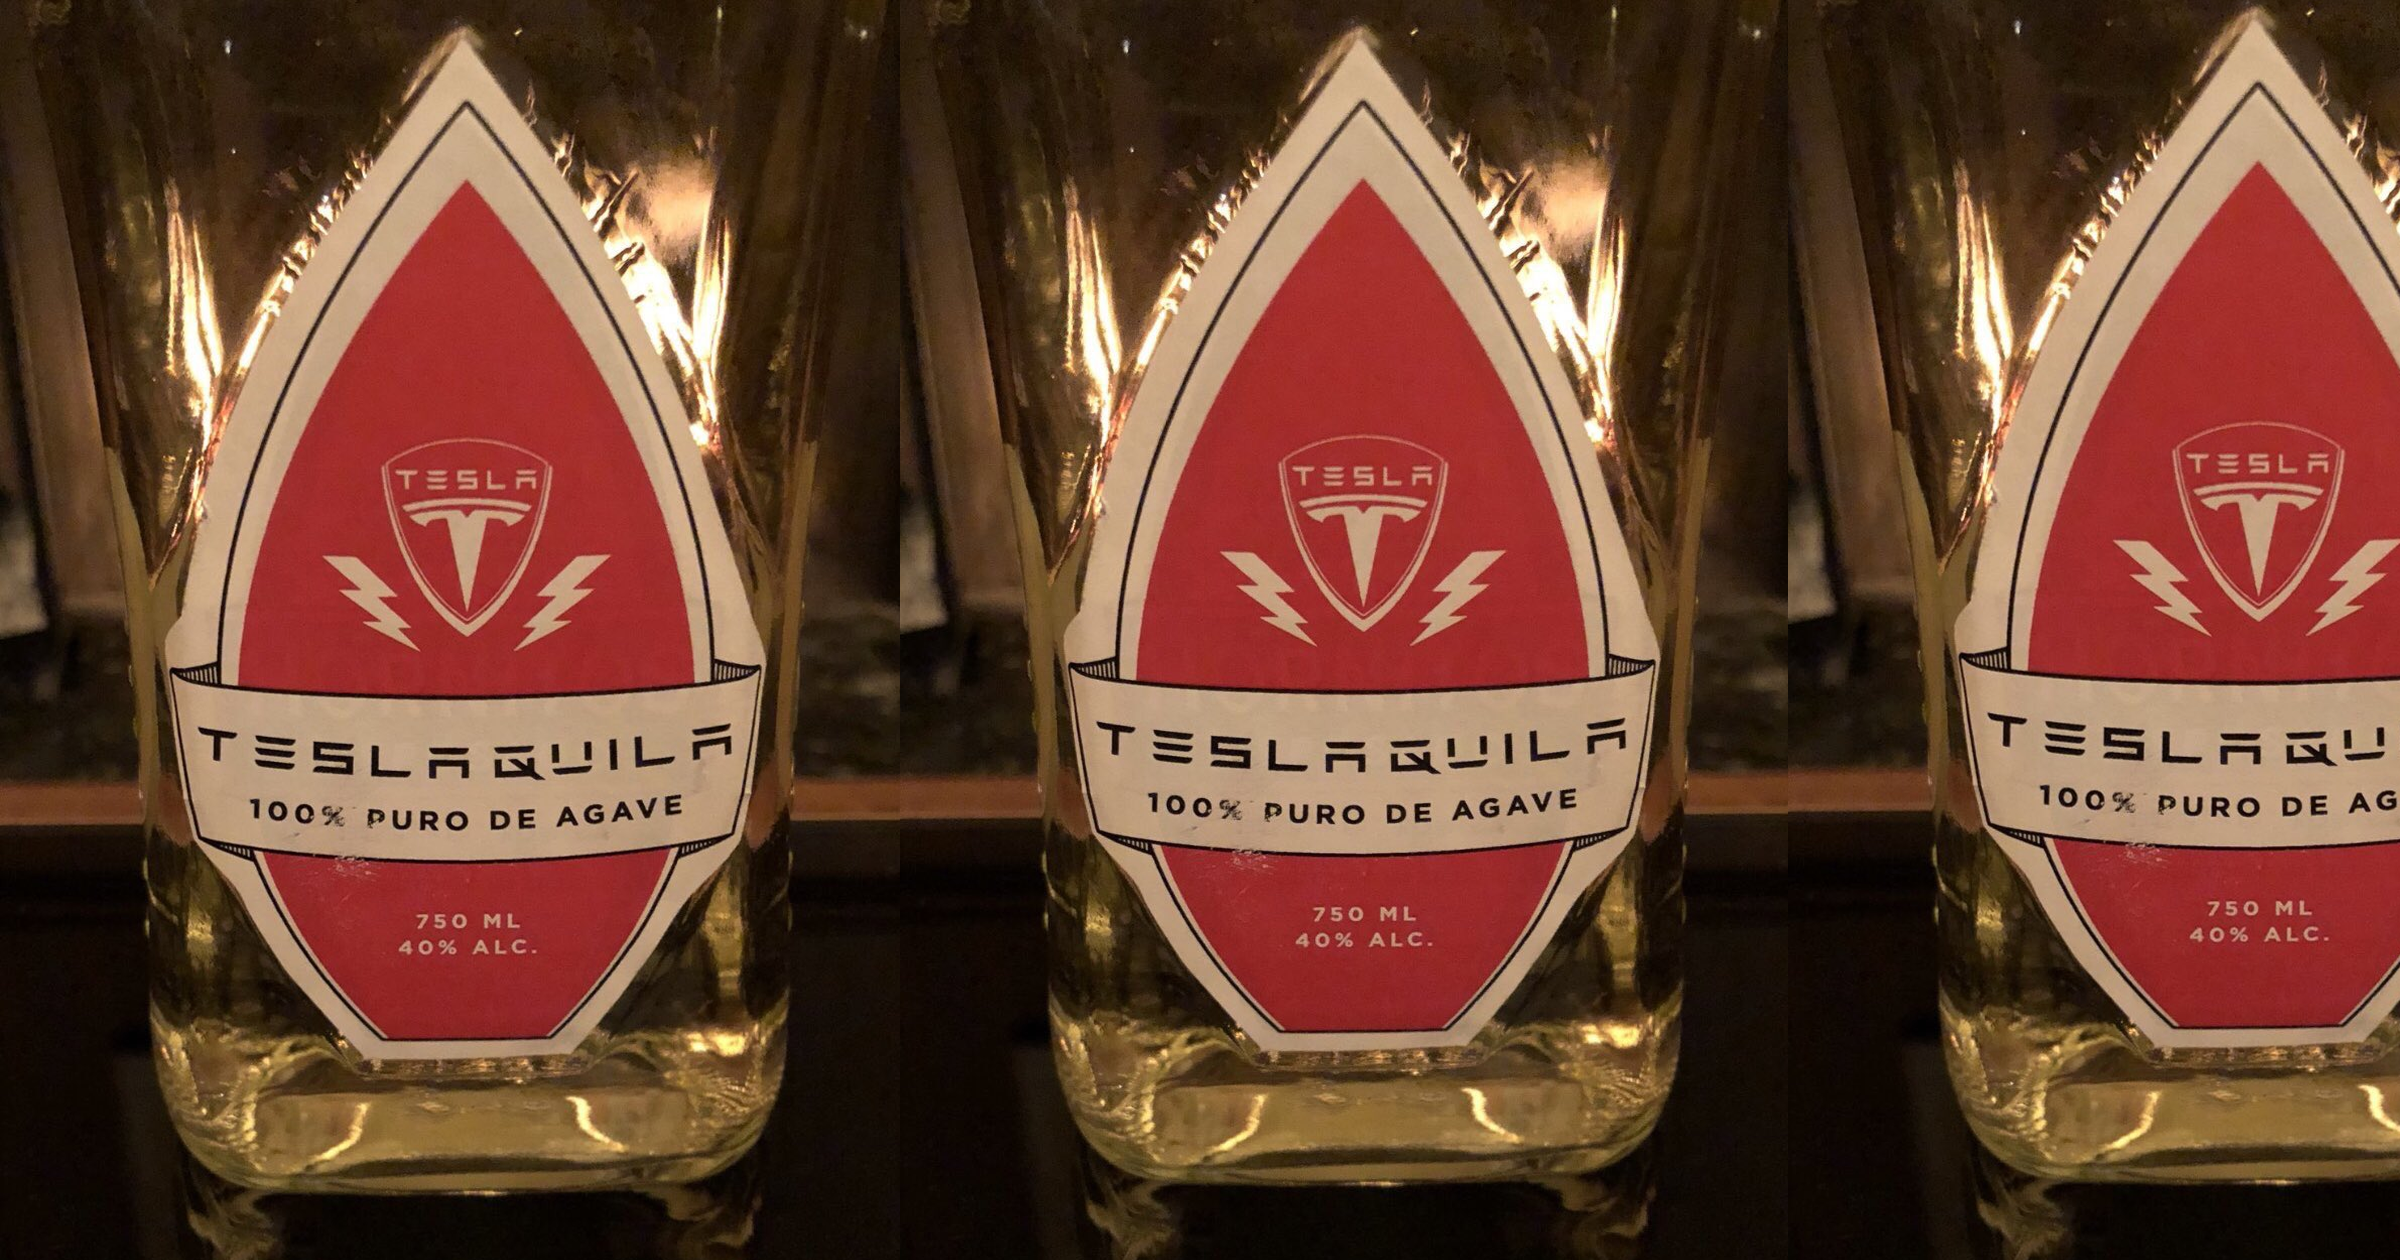 Tesla Chief Executive Officer Elon Musk finally made good on his promise to sell "Tesla Tequila" - two years after teasing the effort in a tweet, and the US$250 (R$1,400) bottle quickly flew off the virtual shelf.